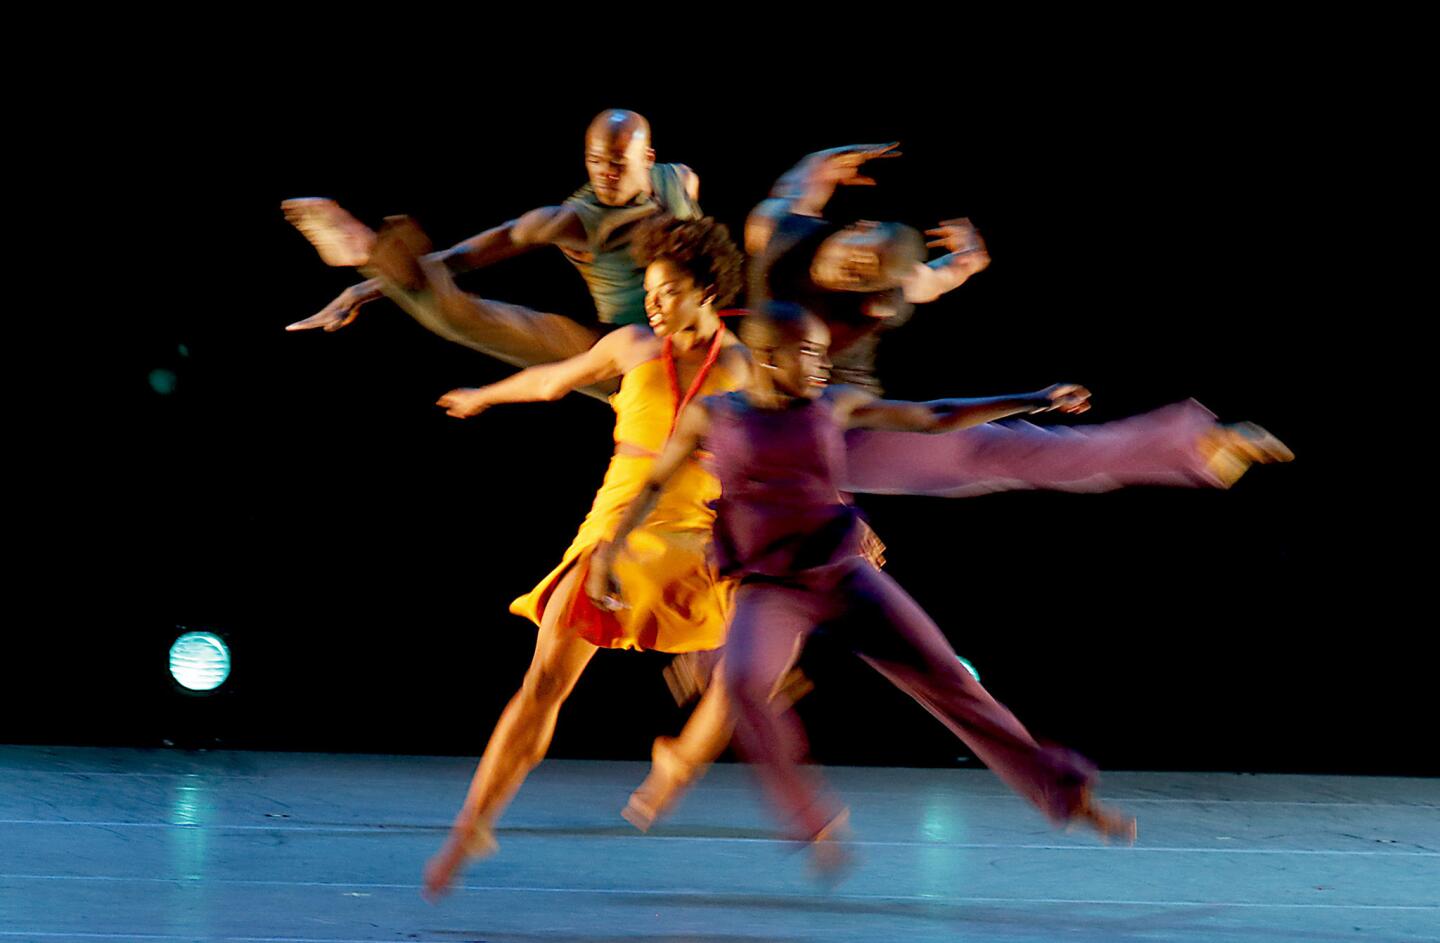 Members of the Alvin Ailey American Dance Theater perform "Another Night" at the Dorothy Chandler Pavilion in Los Angeles on April 18, 2013.